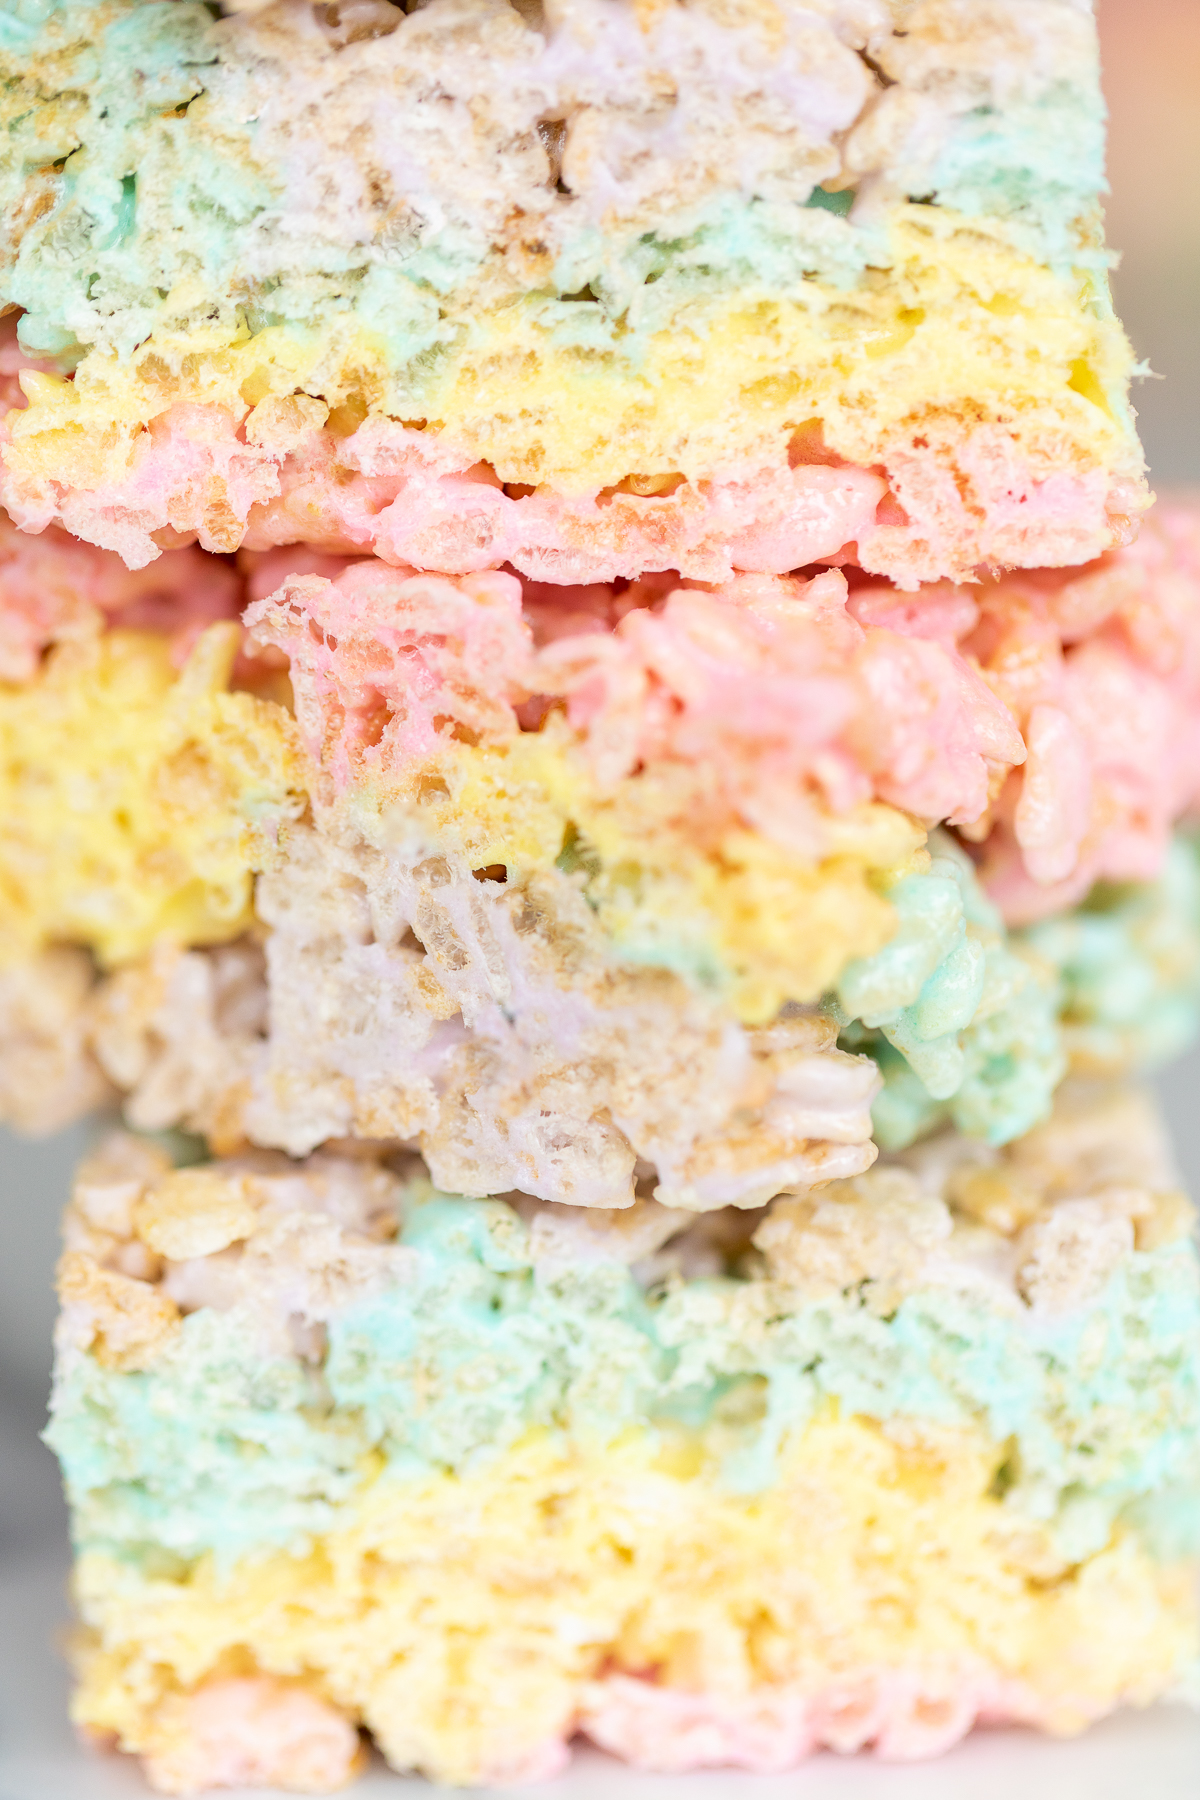 Closeup of stack of 3 Peeps treats, showing layers of color